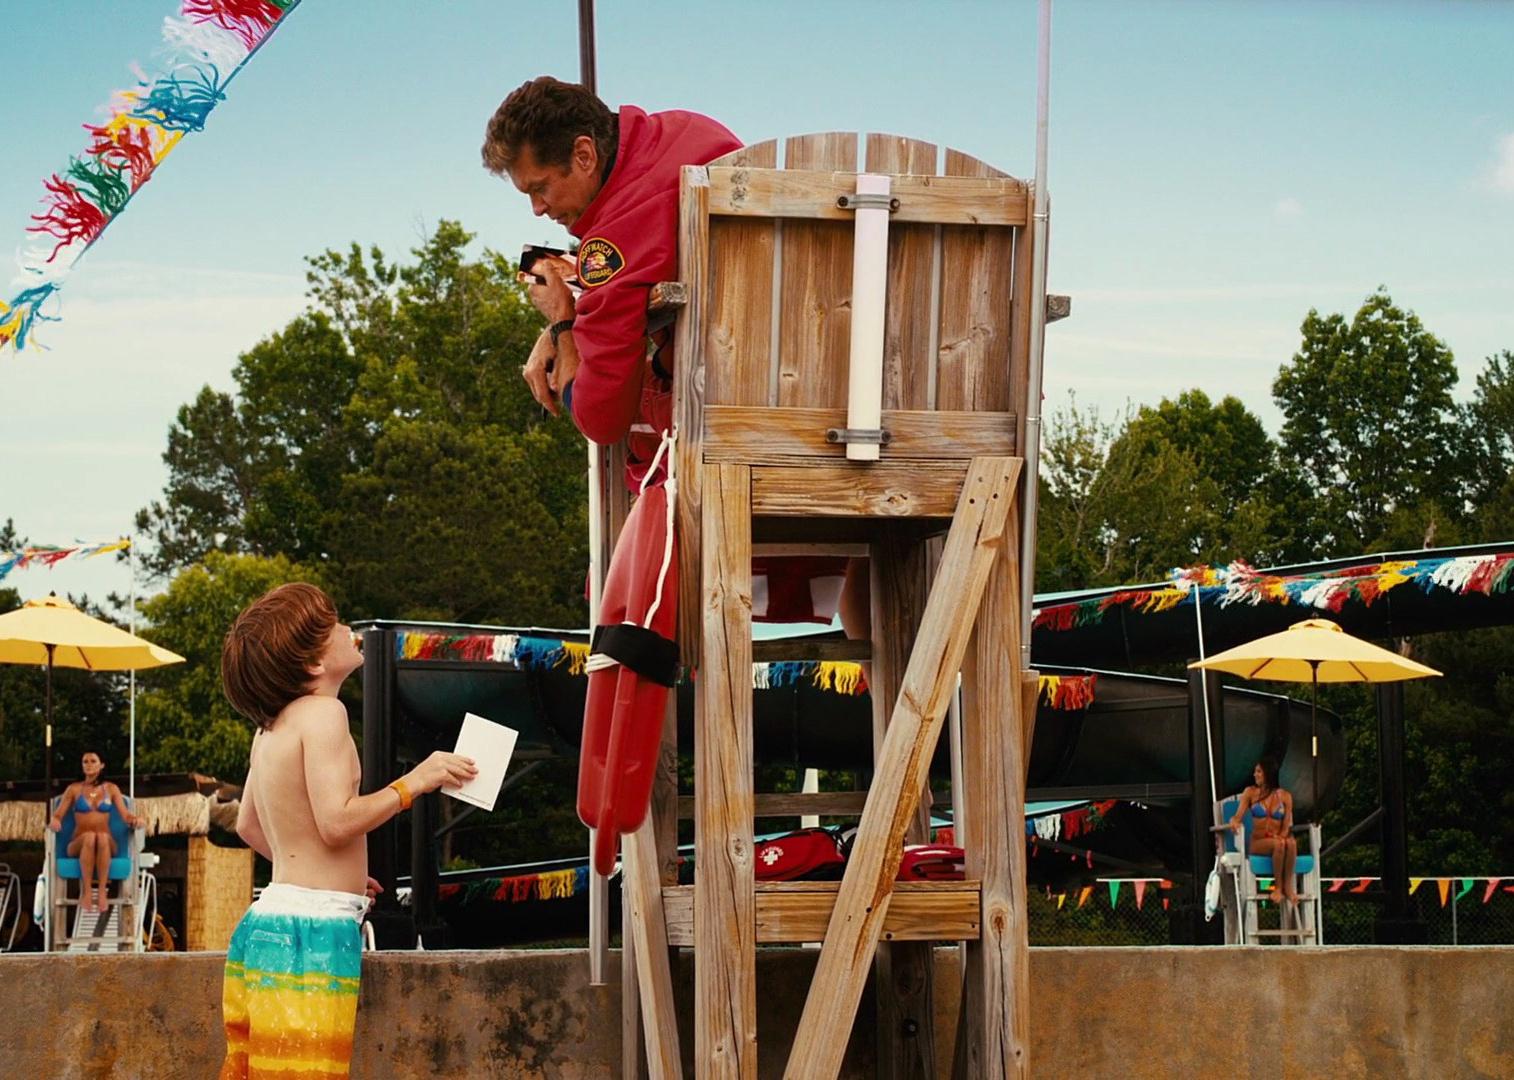 David Hasselhoff in a lifegaurd stand talking to a little boy with two women in bikinis in the background.